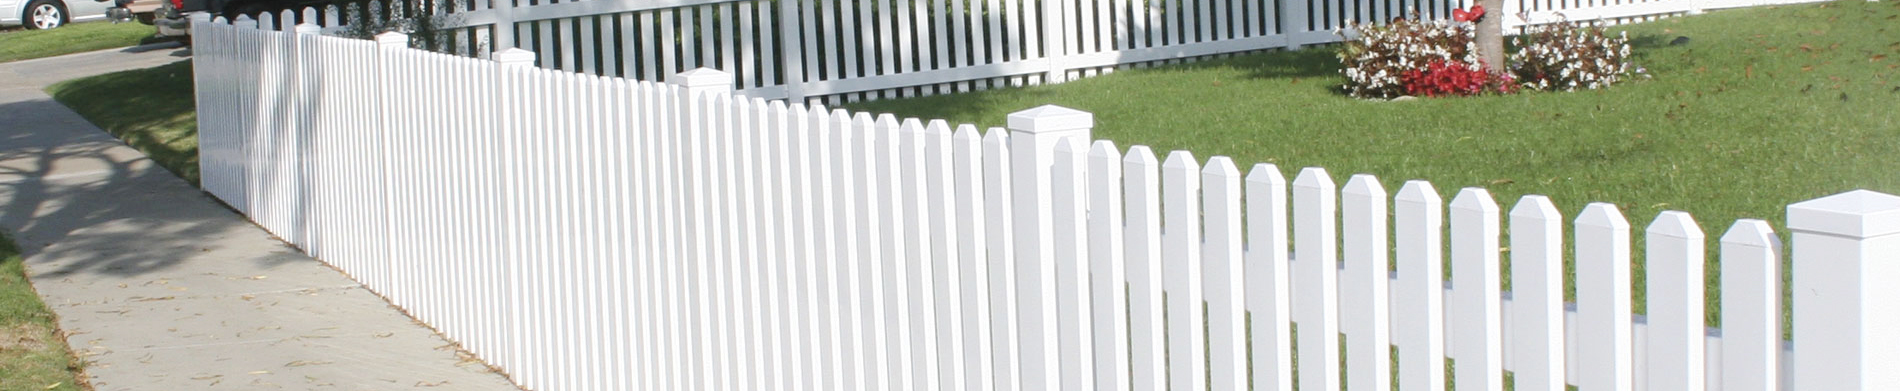 Duramax vinyl fencing is a sure and sheer choice for your property